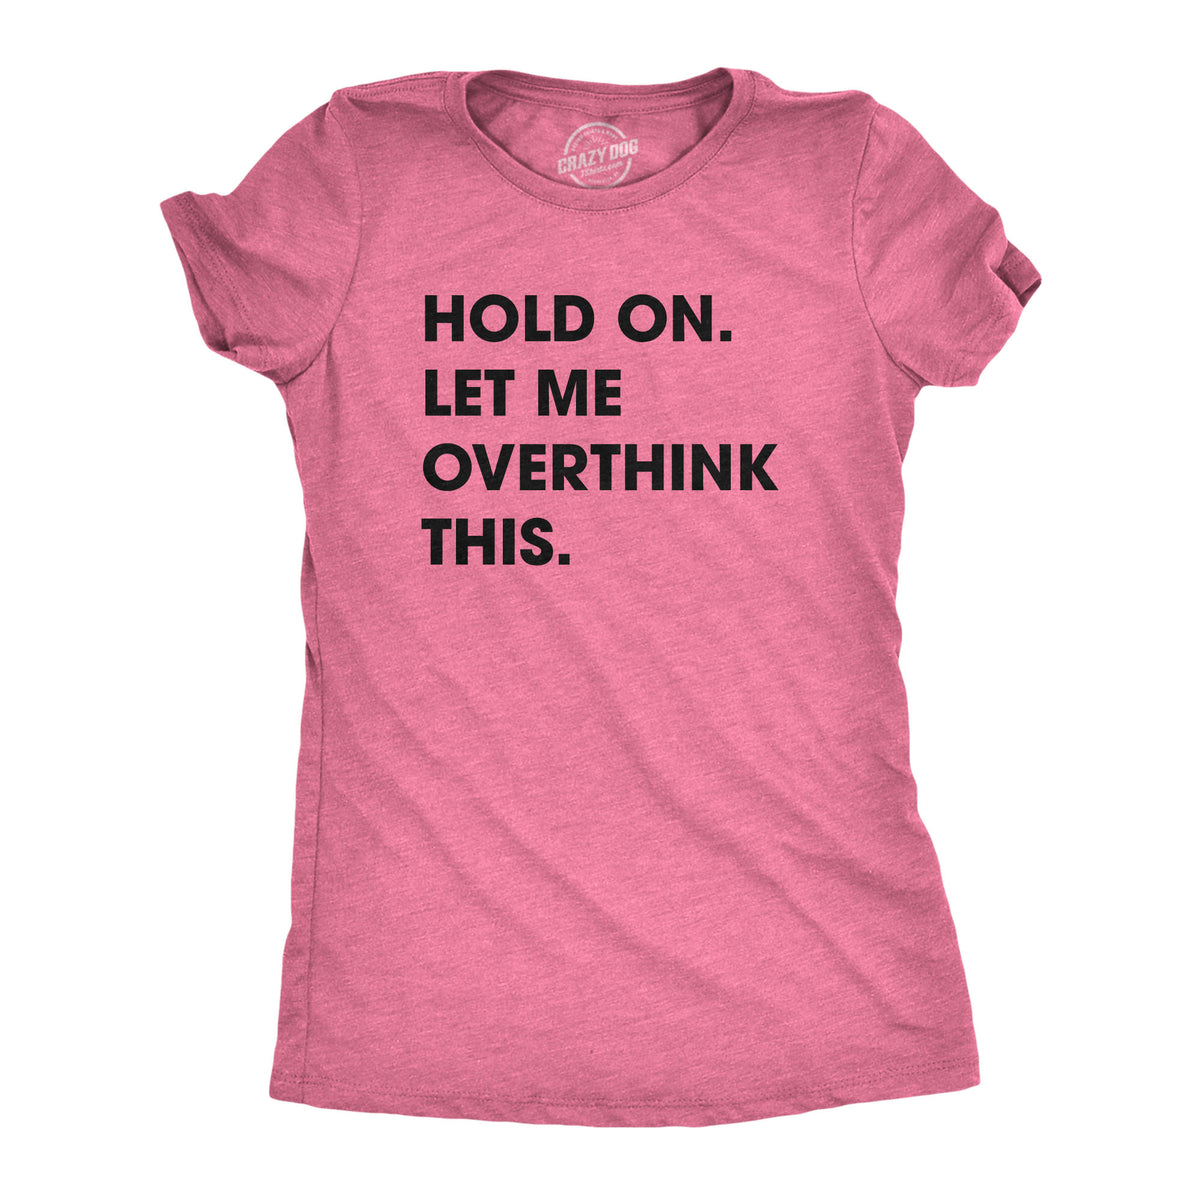 Funny Heather Pink Hold On Let Me Overthink This Womens T Shirt Nerdy Introvert Tee